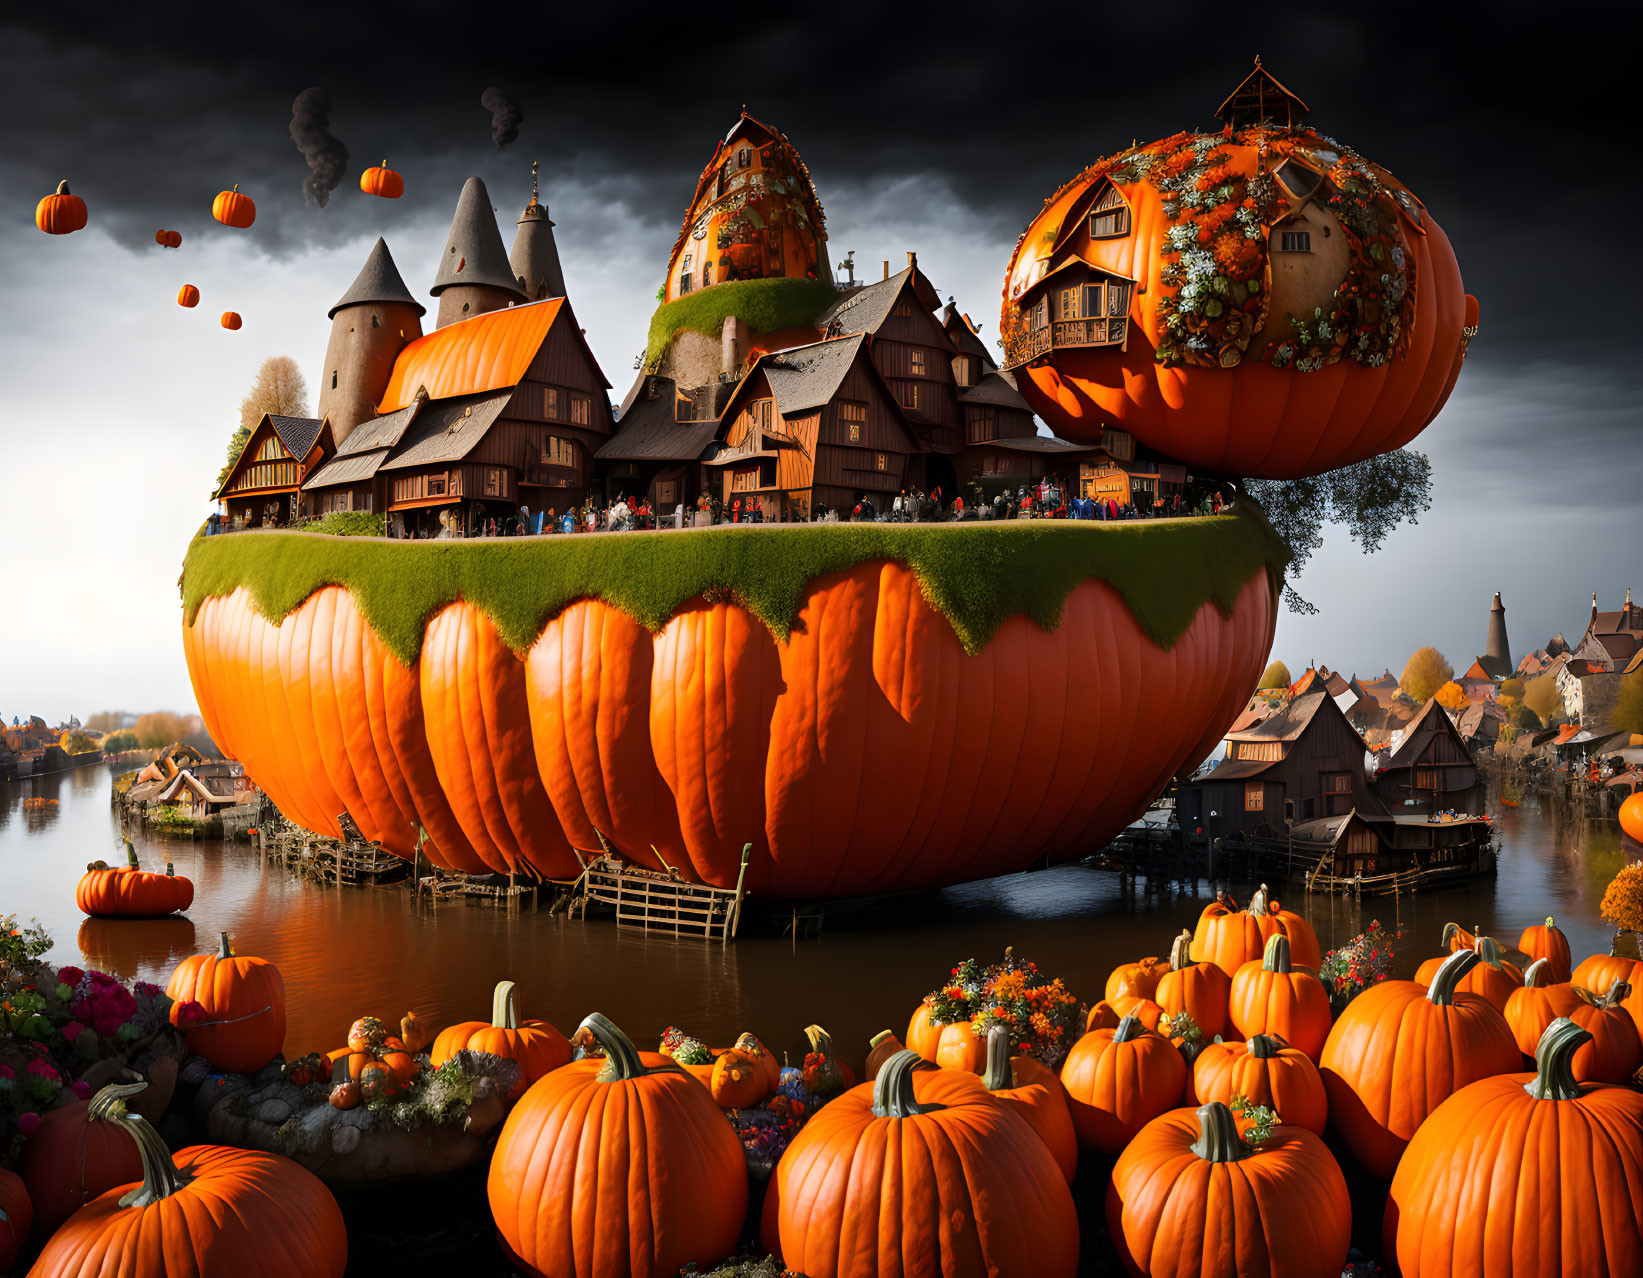 In the wonderful world of pumpkins.